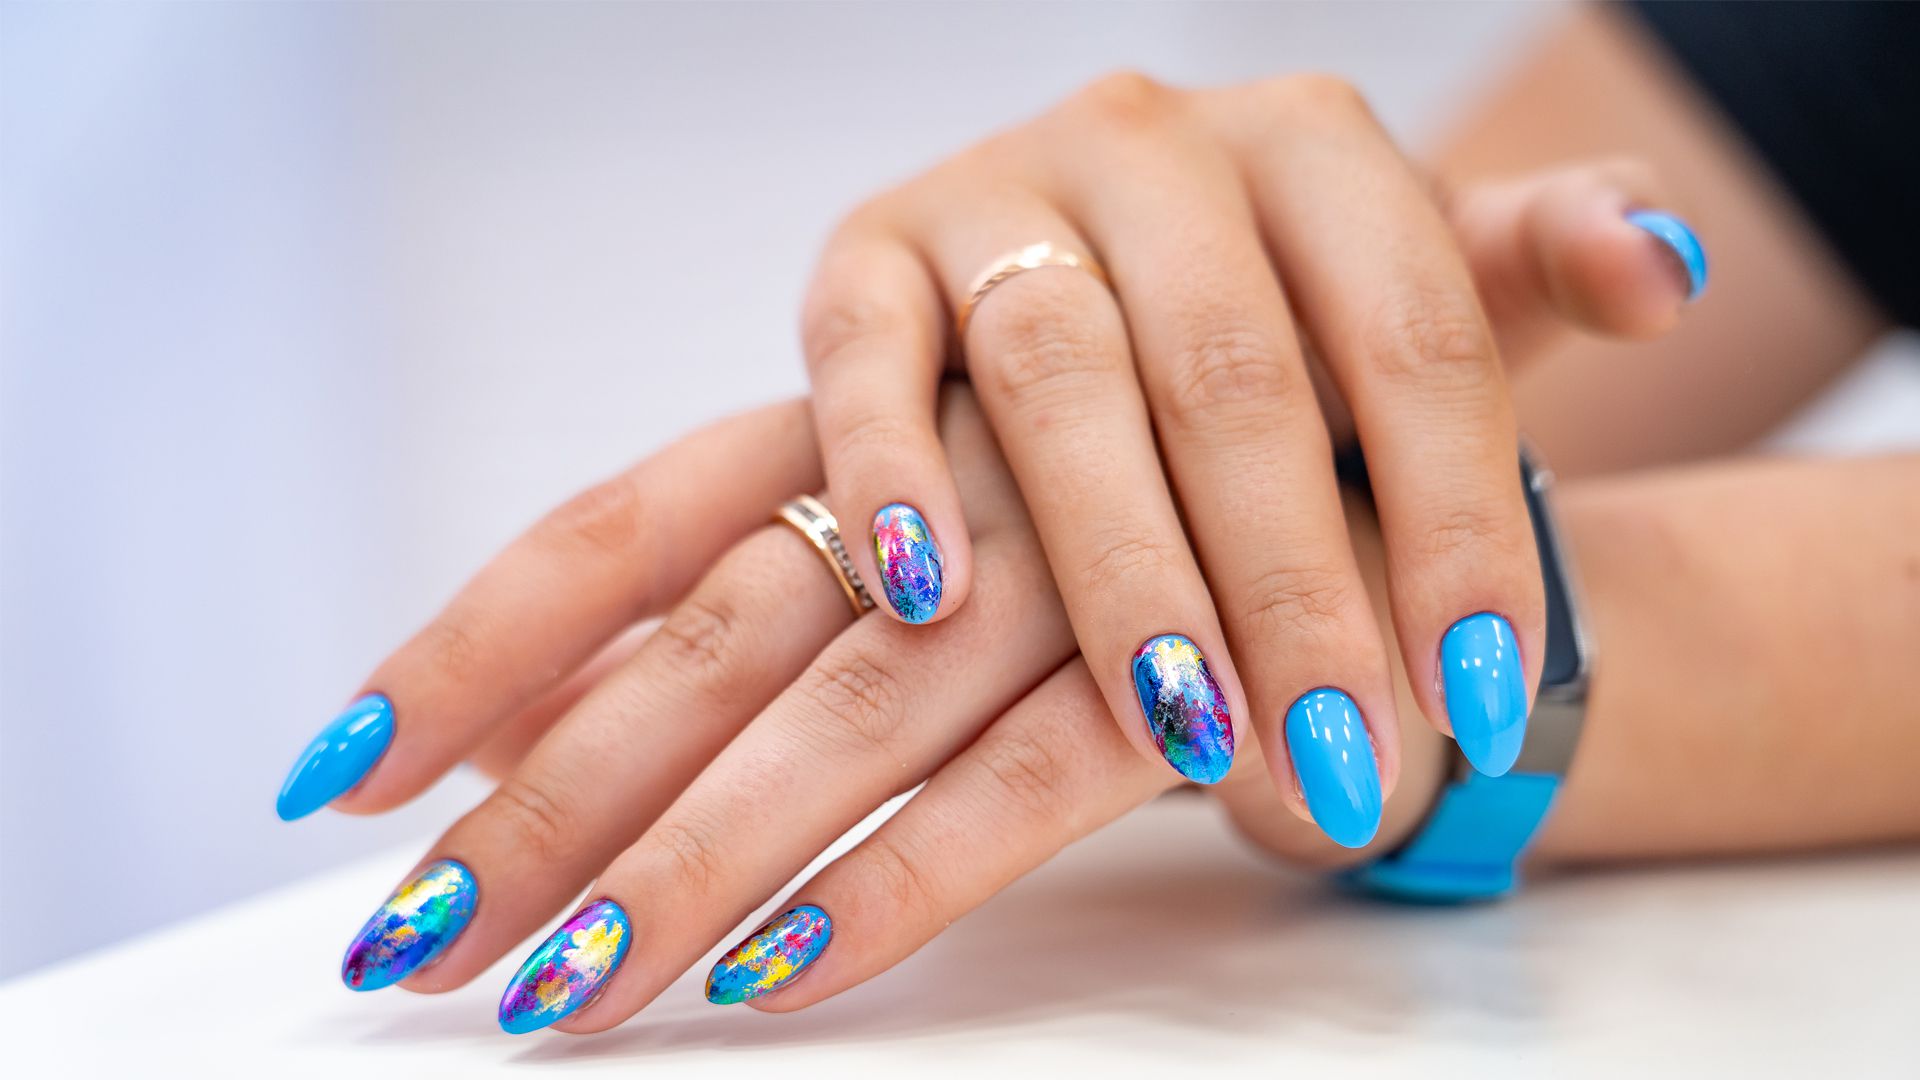 Gorgeous Nail Designs to Inspire You - wide 4